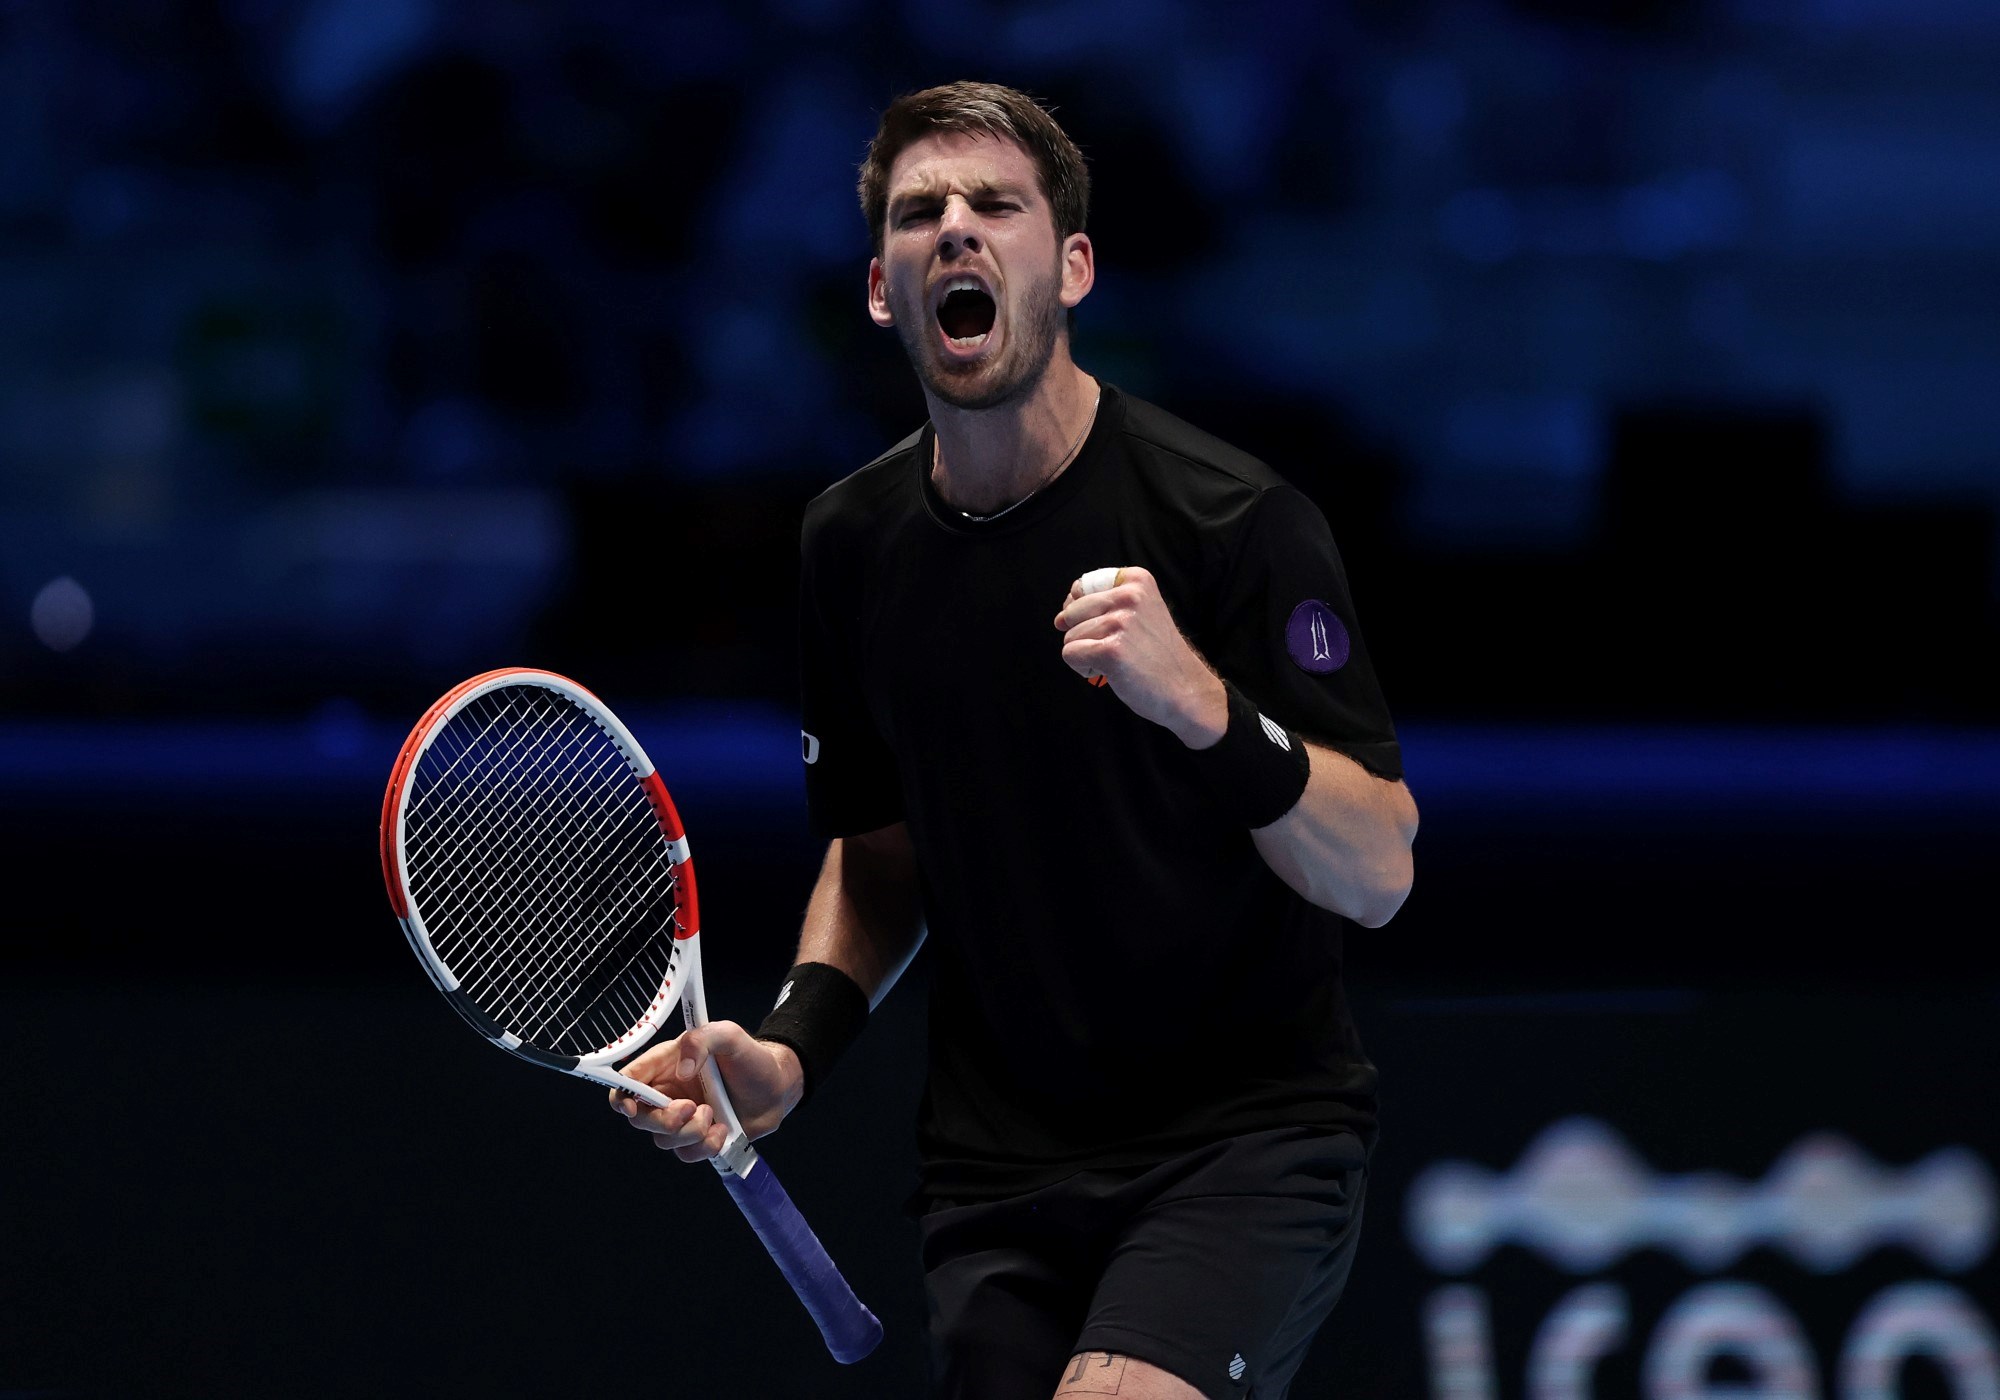 Cameron Norrie celebrates win against Casper Ruud of Norway during the Nitto ATP World Tour Finals 2021